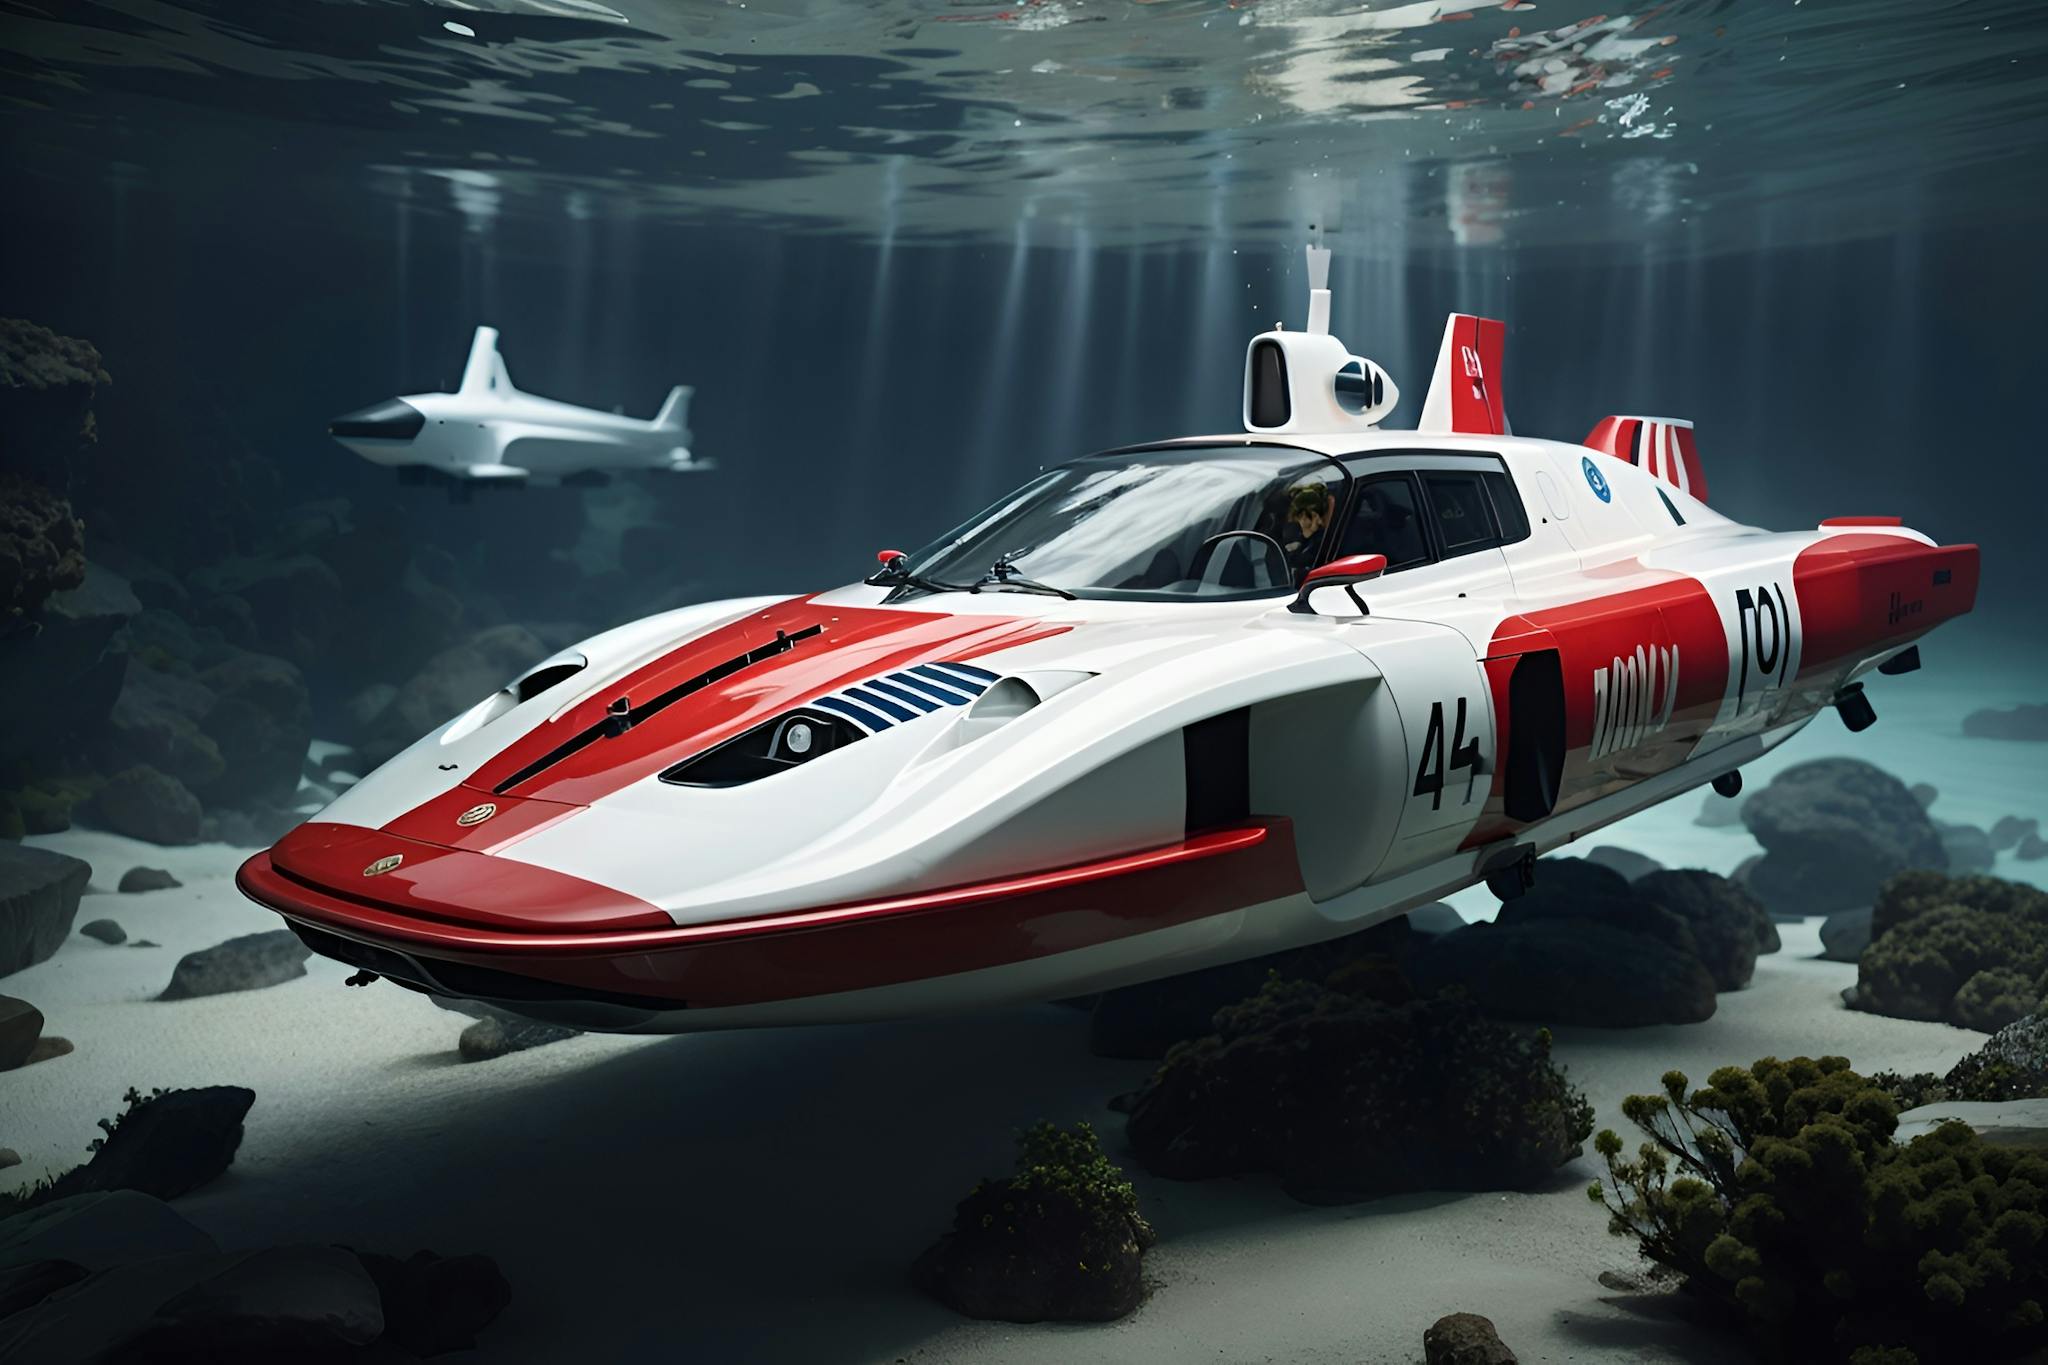 Concept image of sub racer